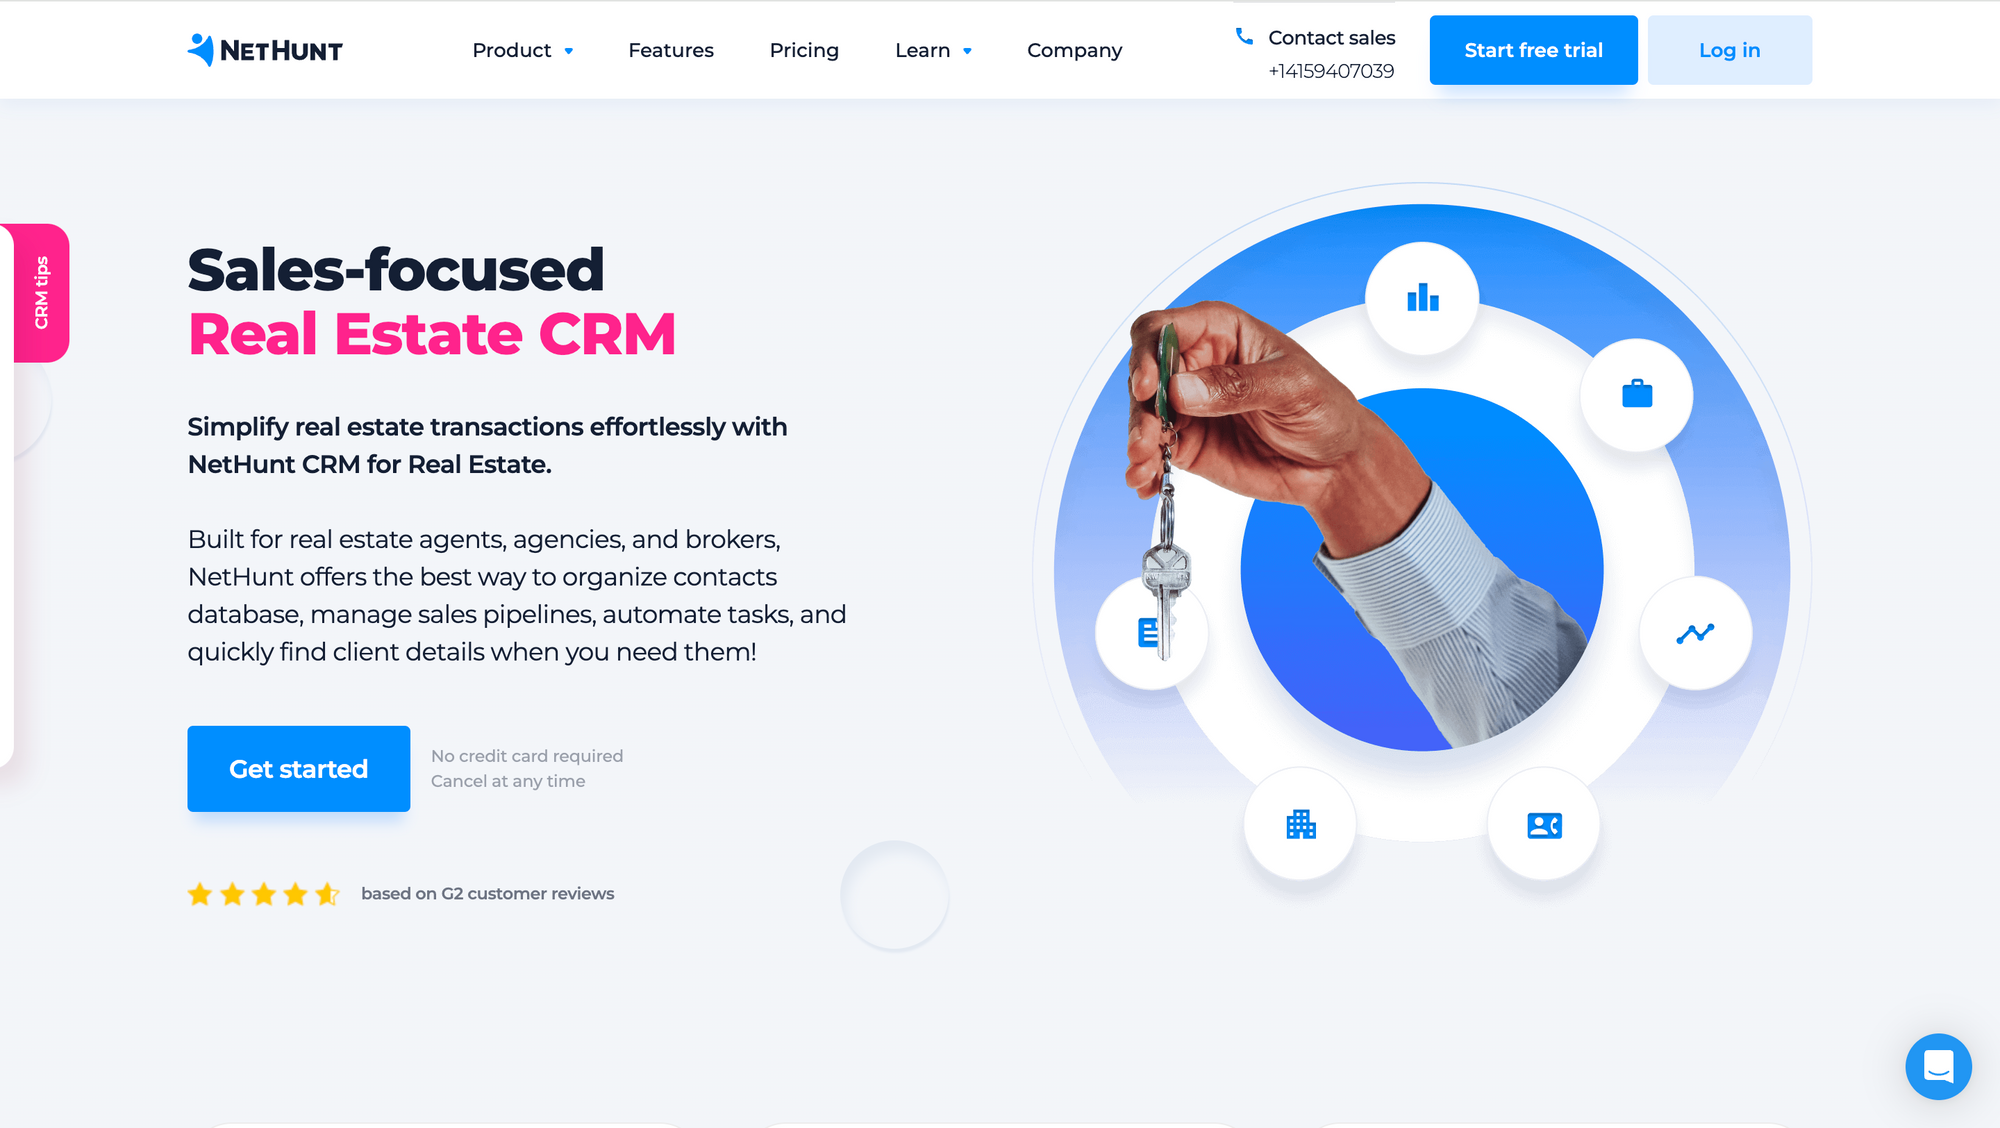 NetHunt CRM: A real estate CRM